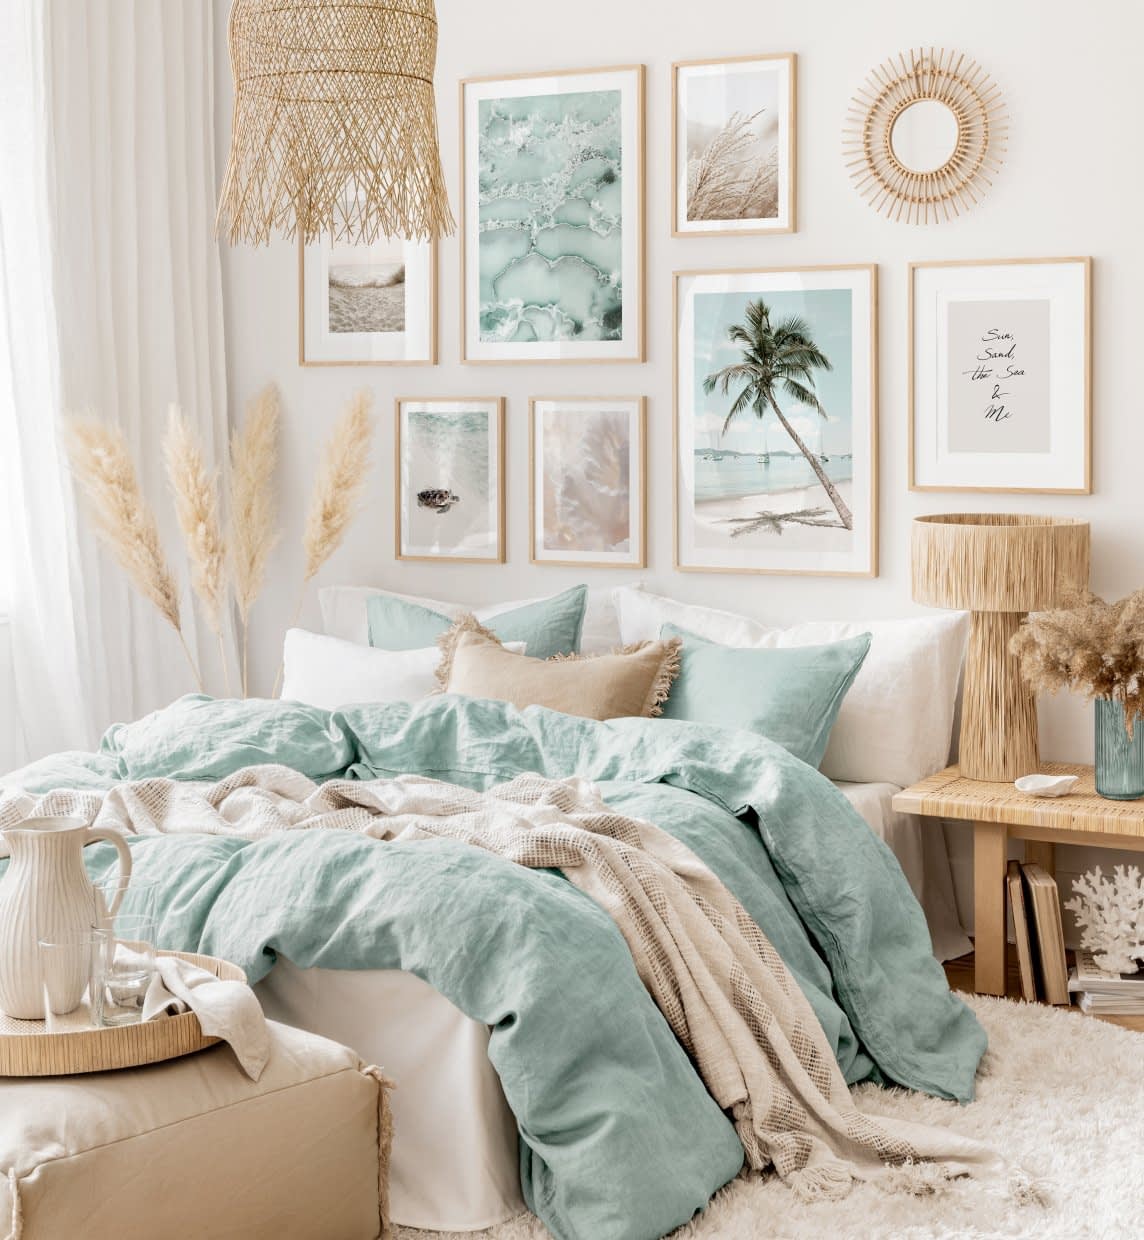 20 Gorgeous Boho Bedroom Ideas to Try - Emily May